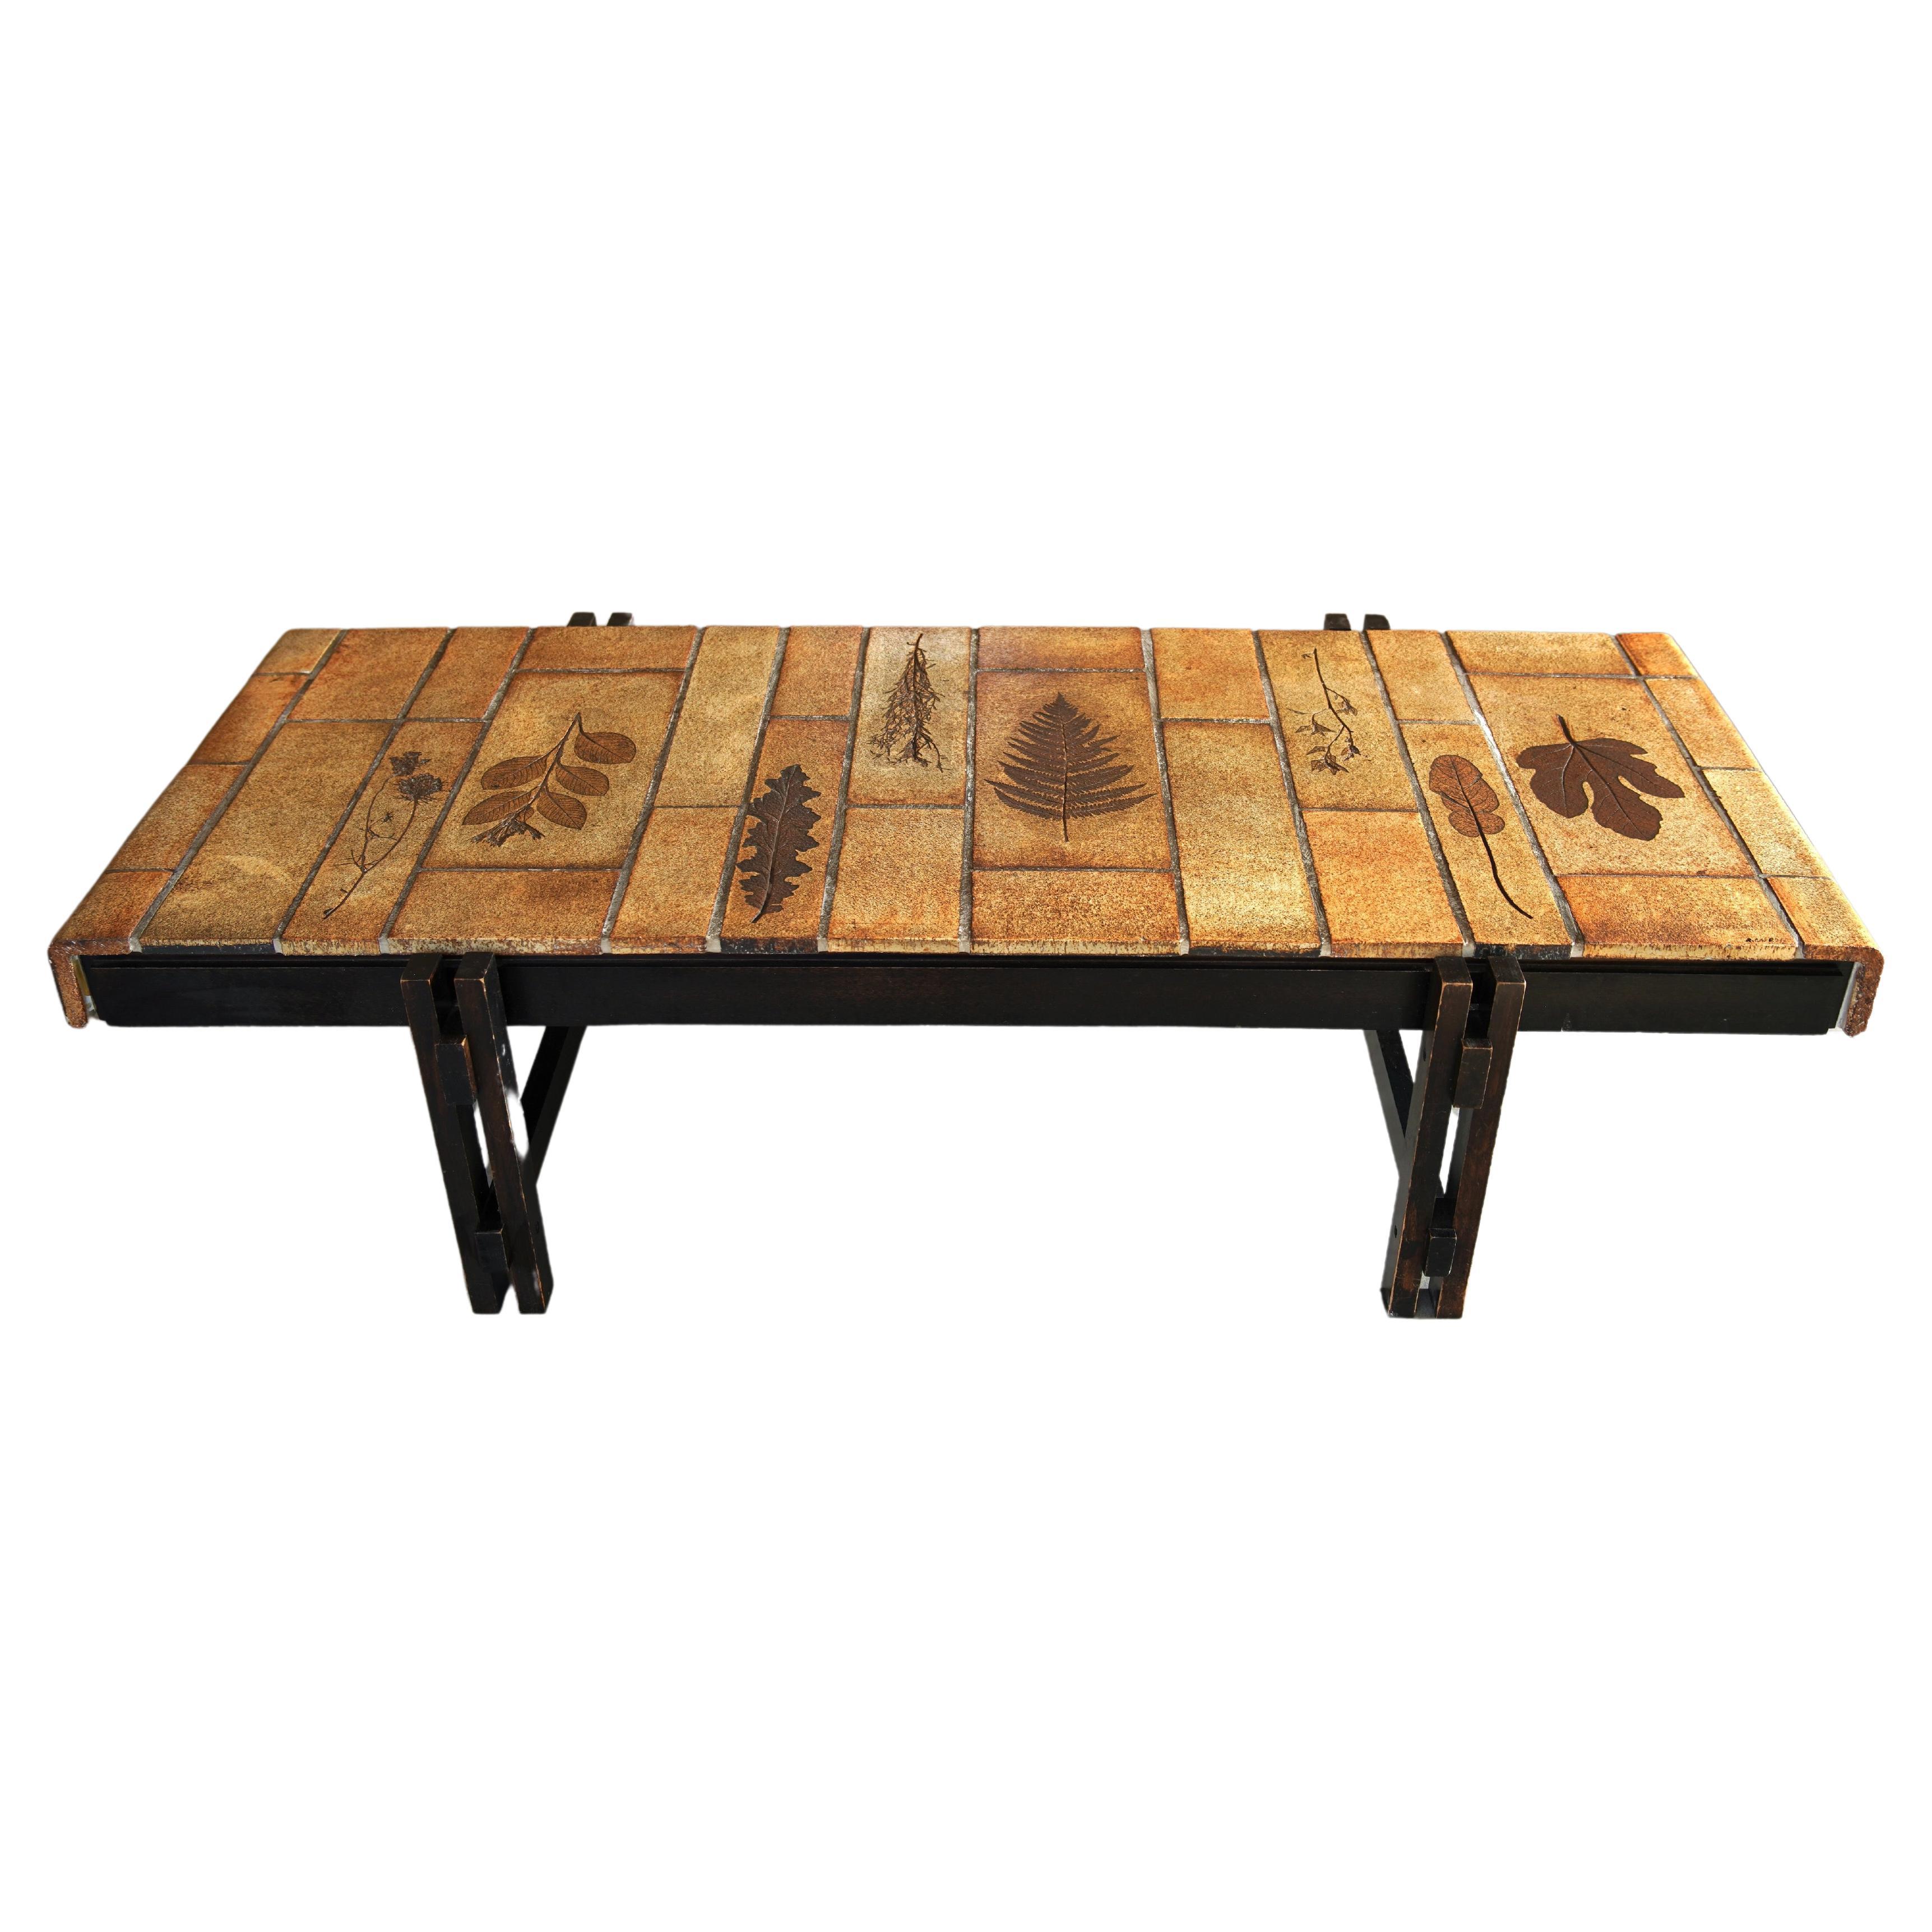 Roger Capron Coffee Table with Garrigue Tiles, France 1970s For Sale